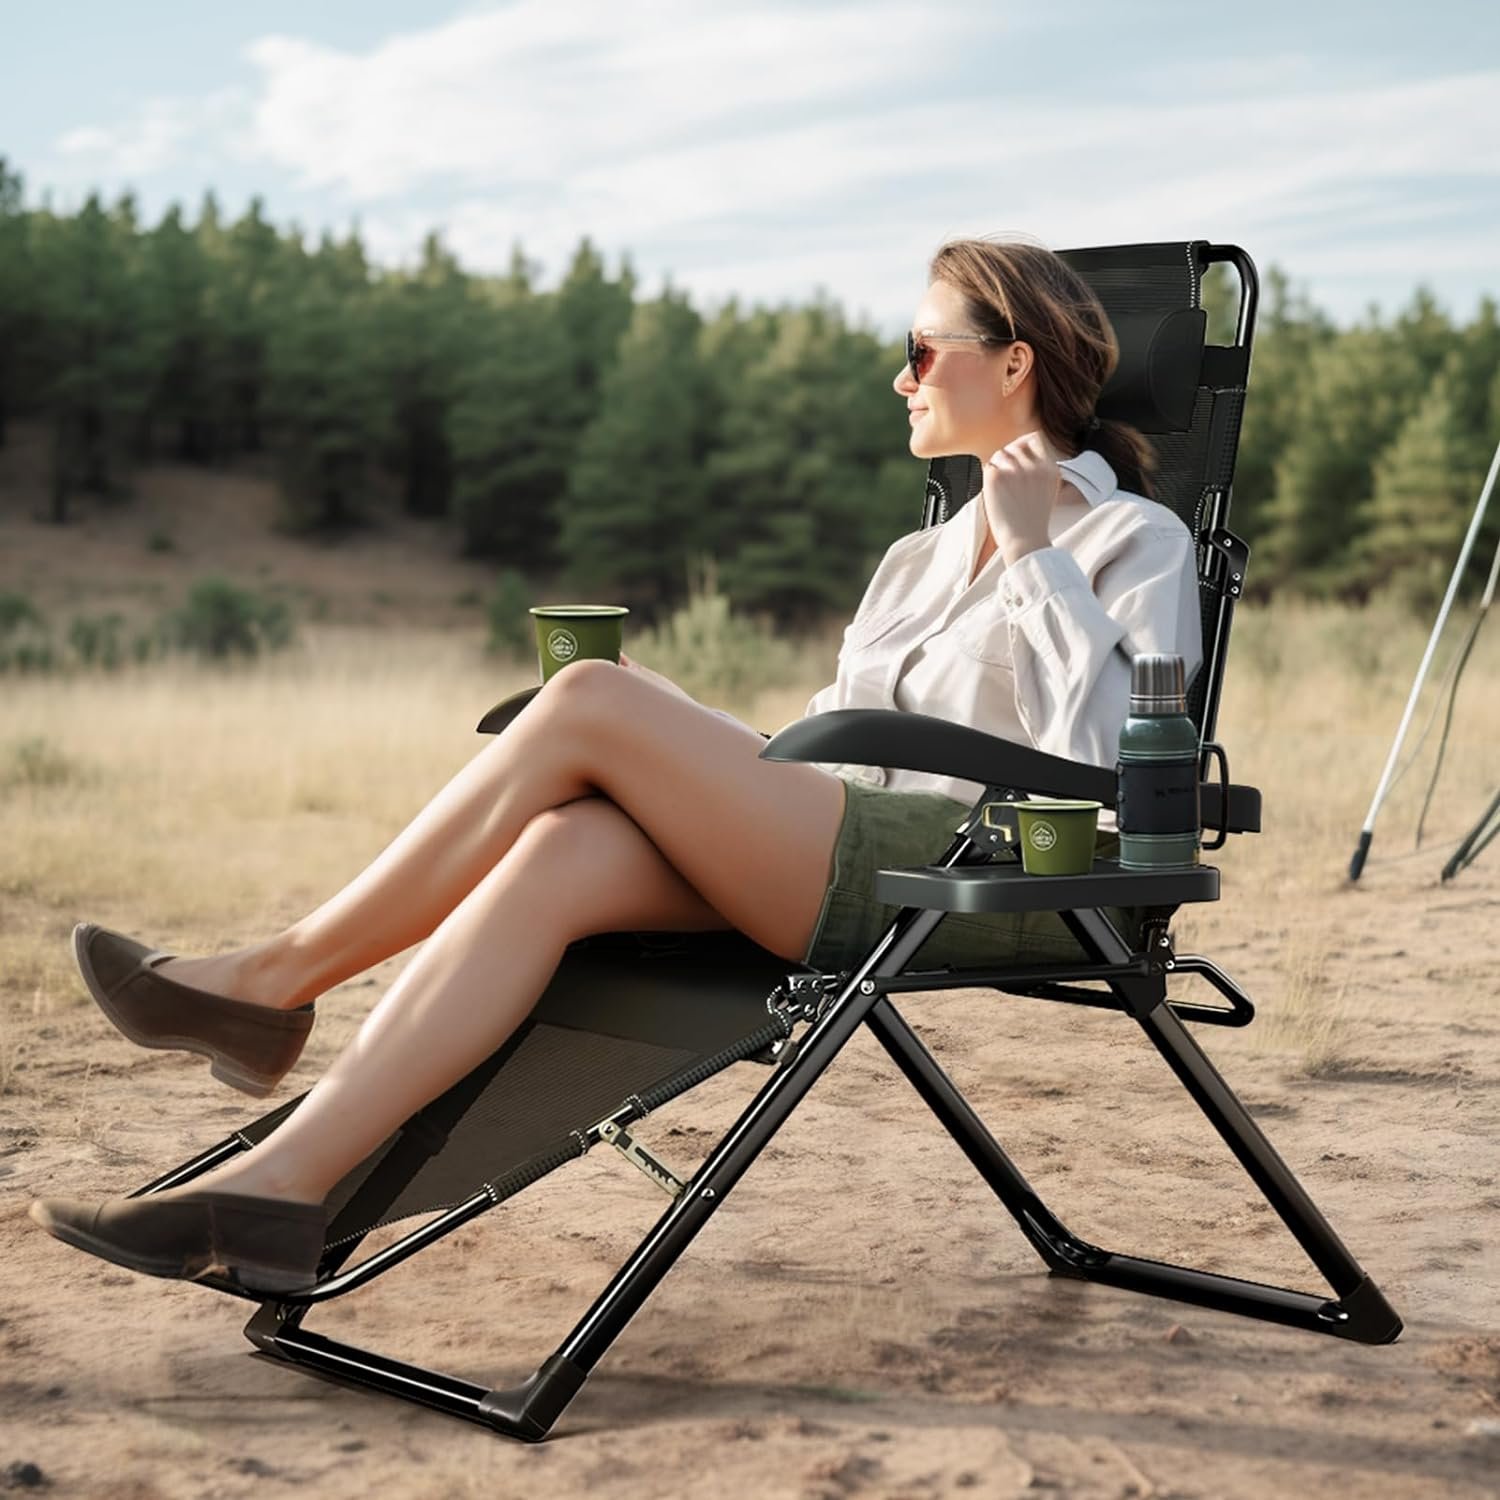 UMAY Folding Recliner Chair 3 in 1 Review